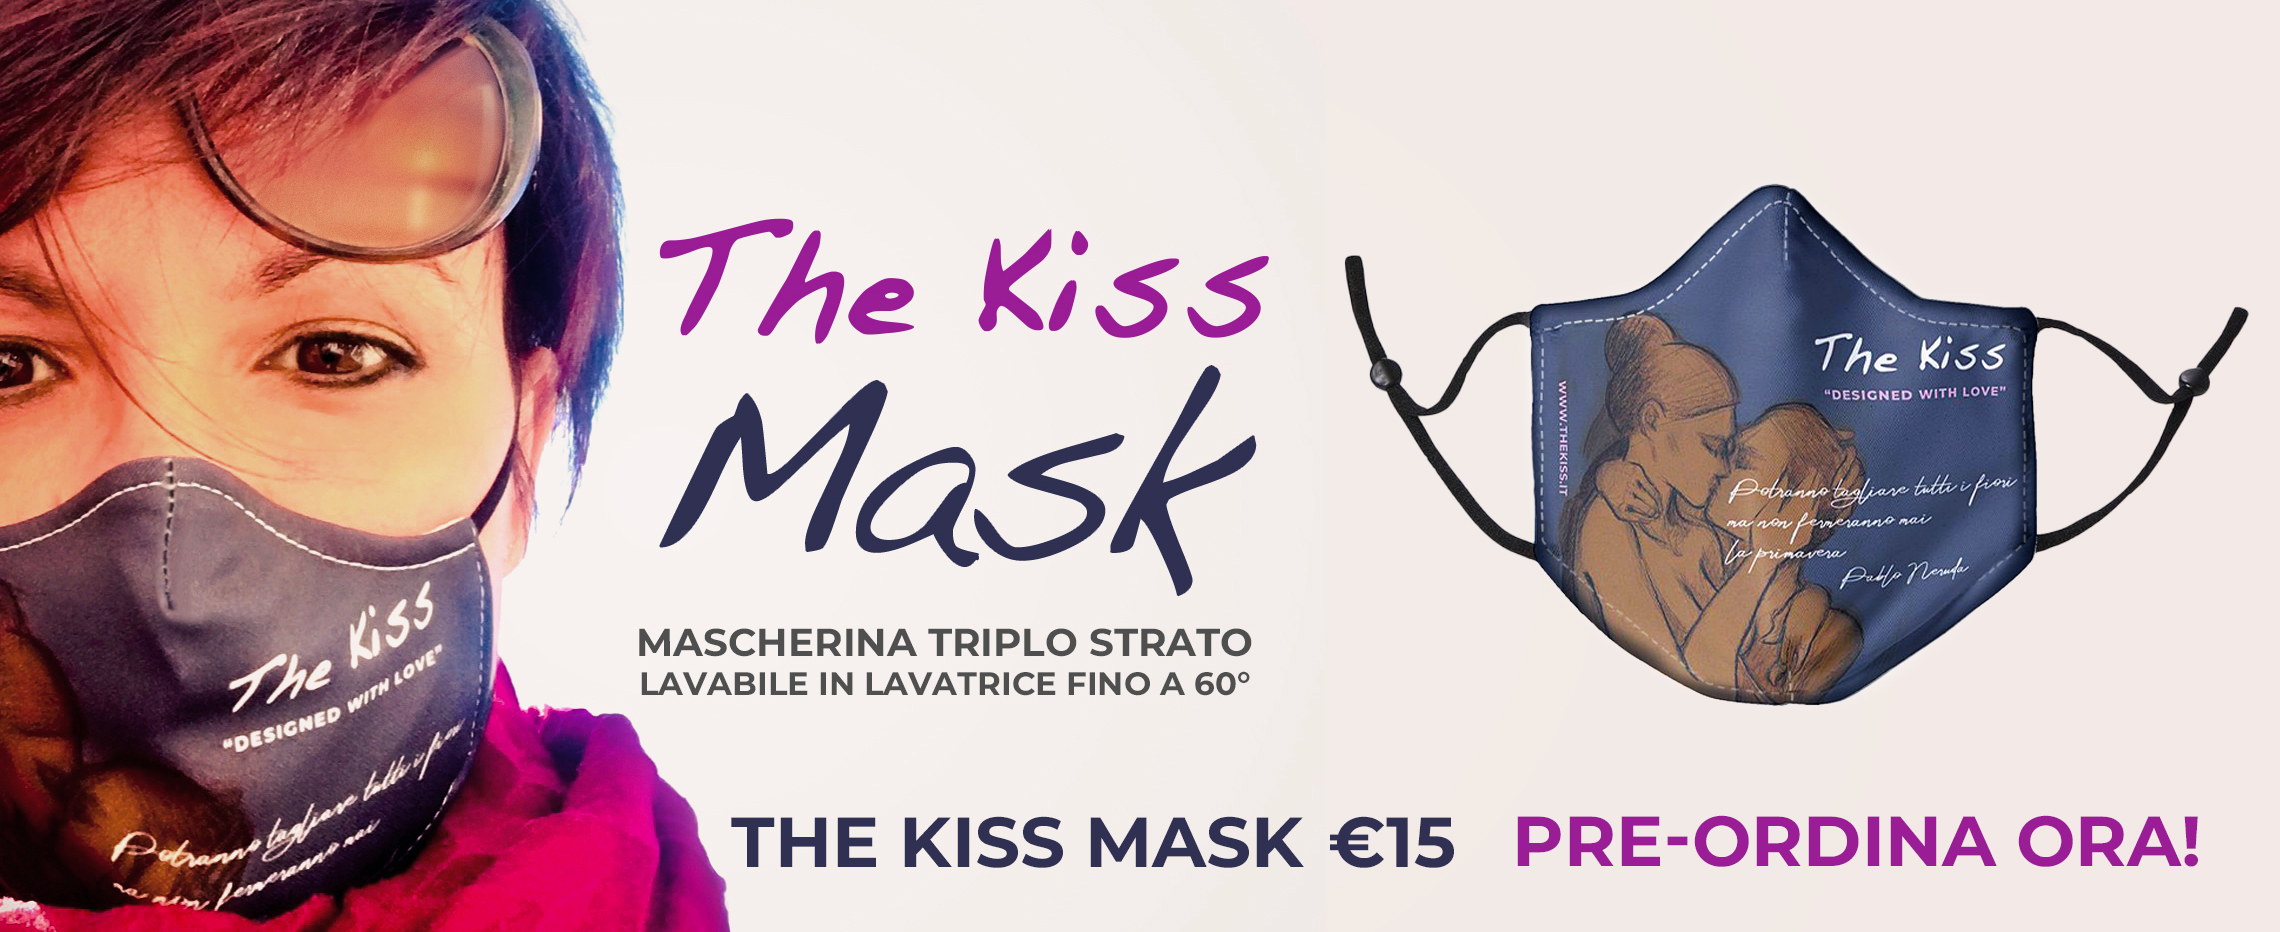 The Kiss Mask